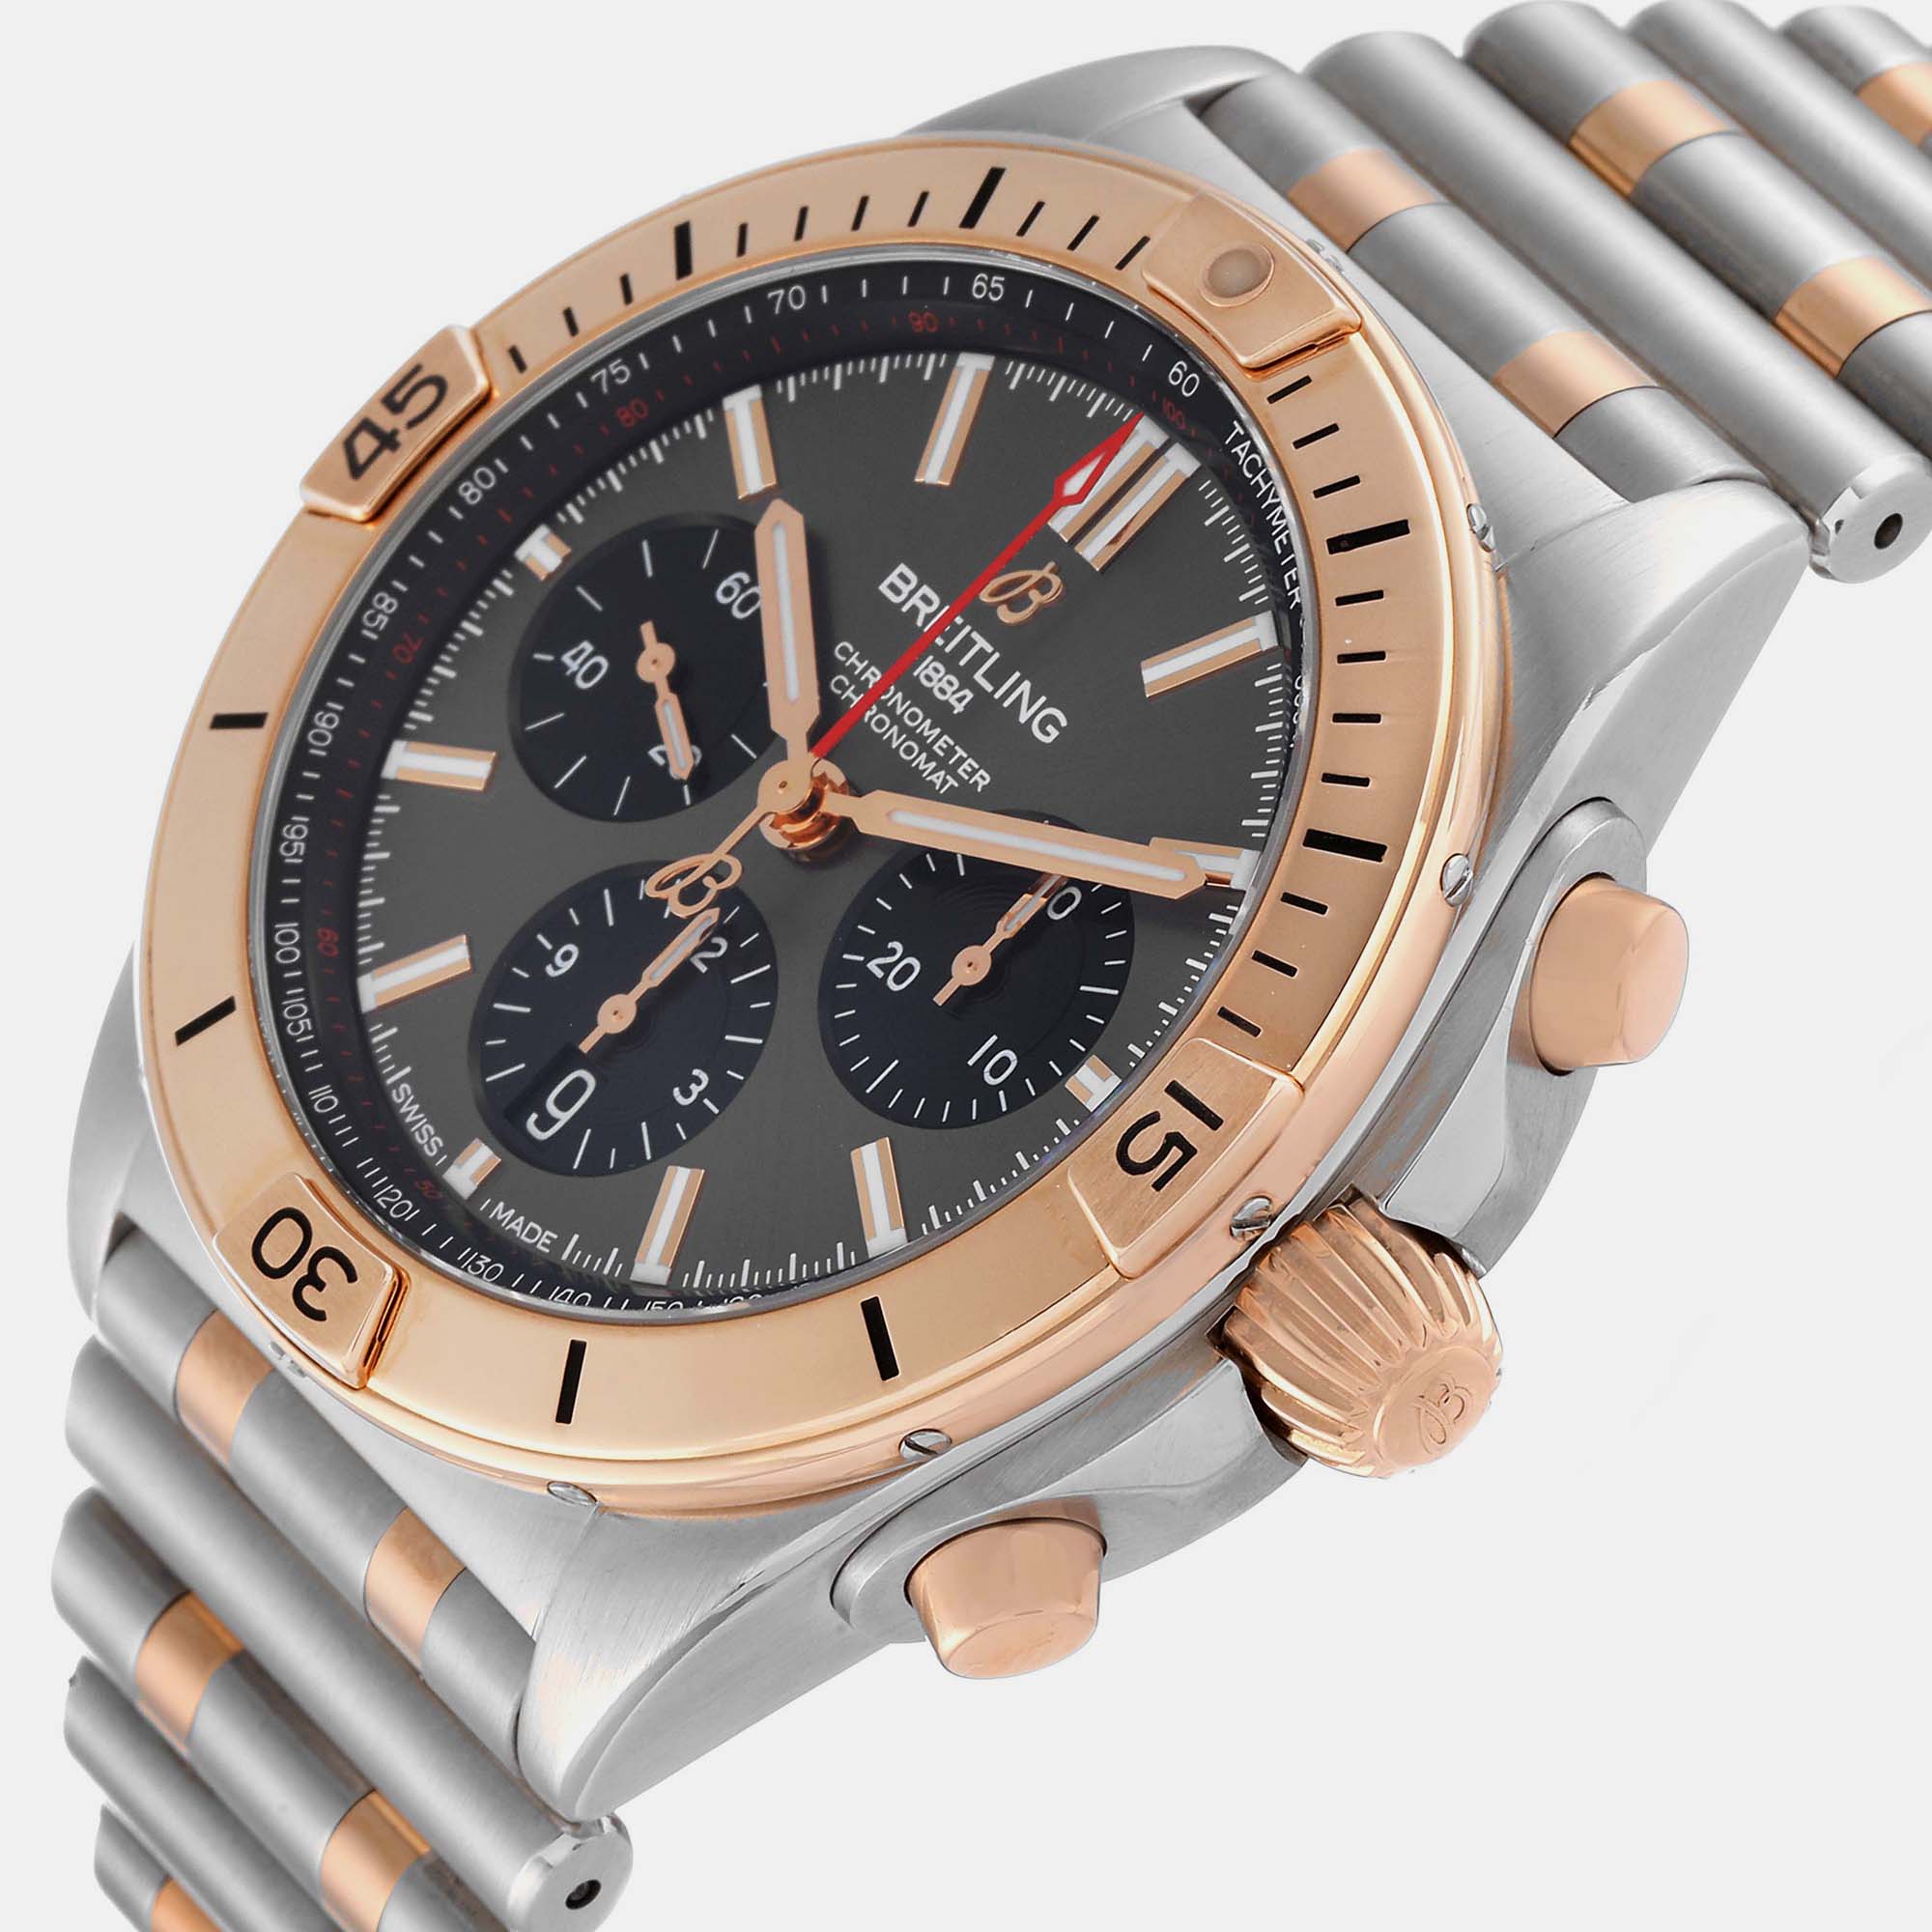 

Breitling Grey 18k Rose Gold And Stainless Steel Chronomat UB0134 Automatic Men's Wristwatch 42 mm